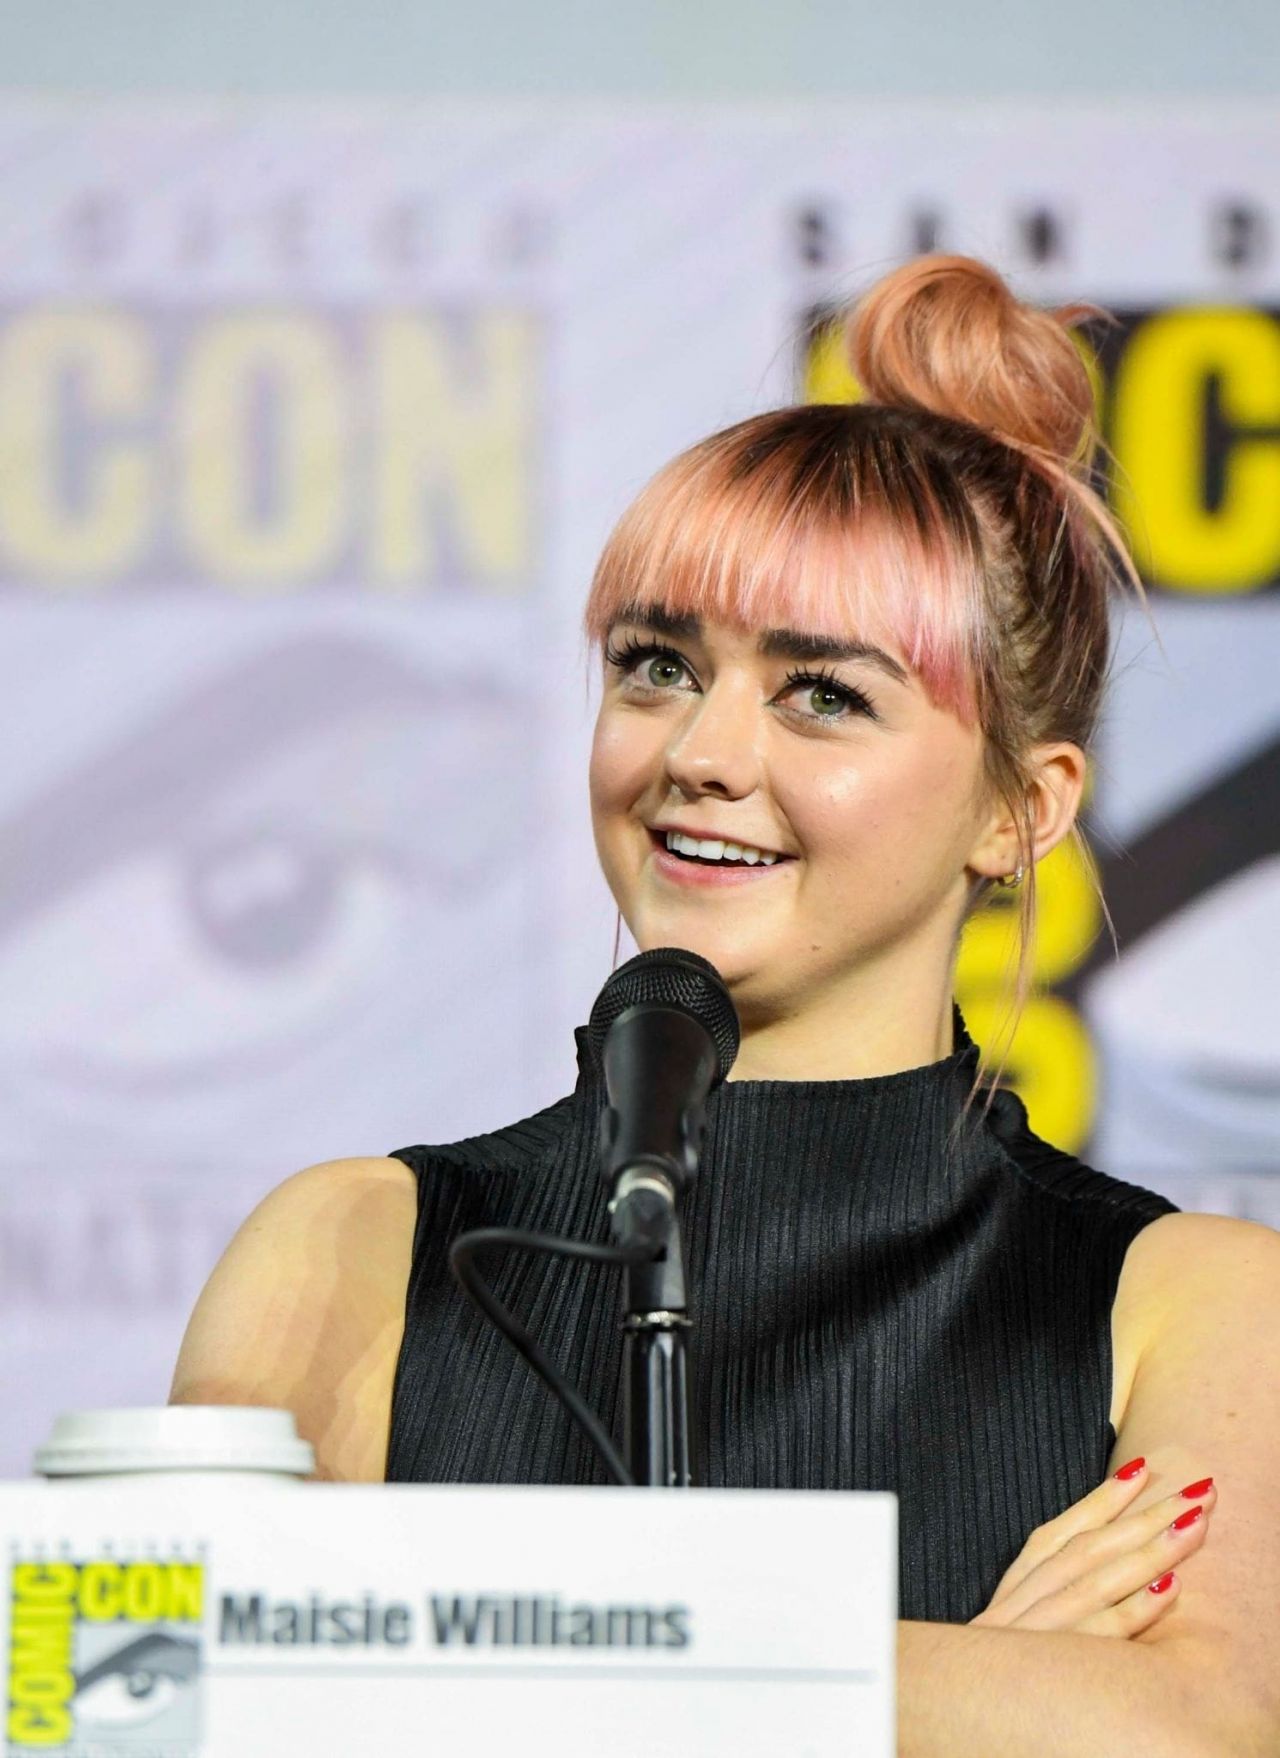 maisie-williams-game-of-thrones-panel-q-a-at-sdcc-2019-2.jpg